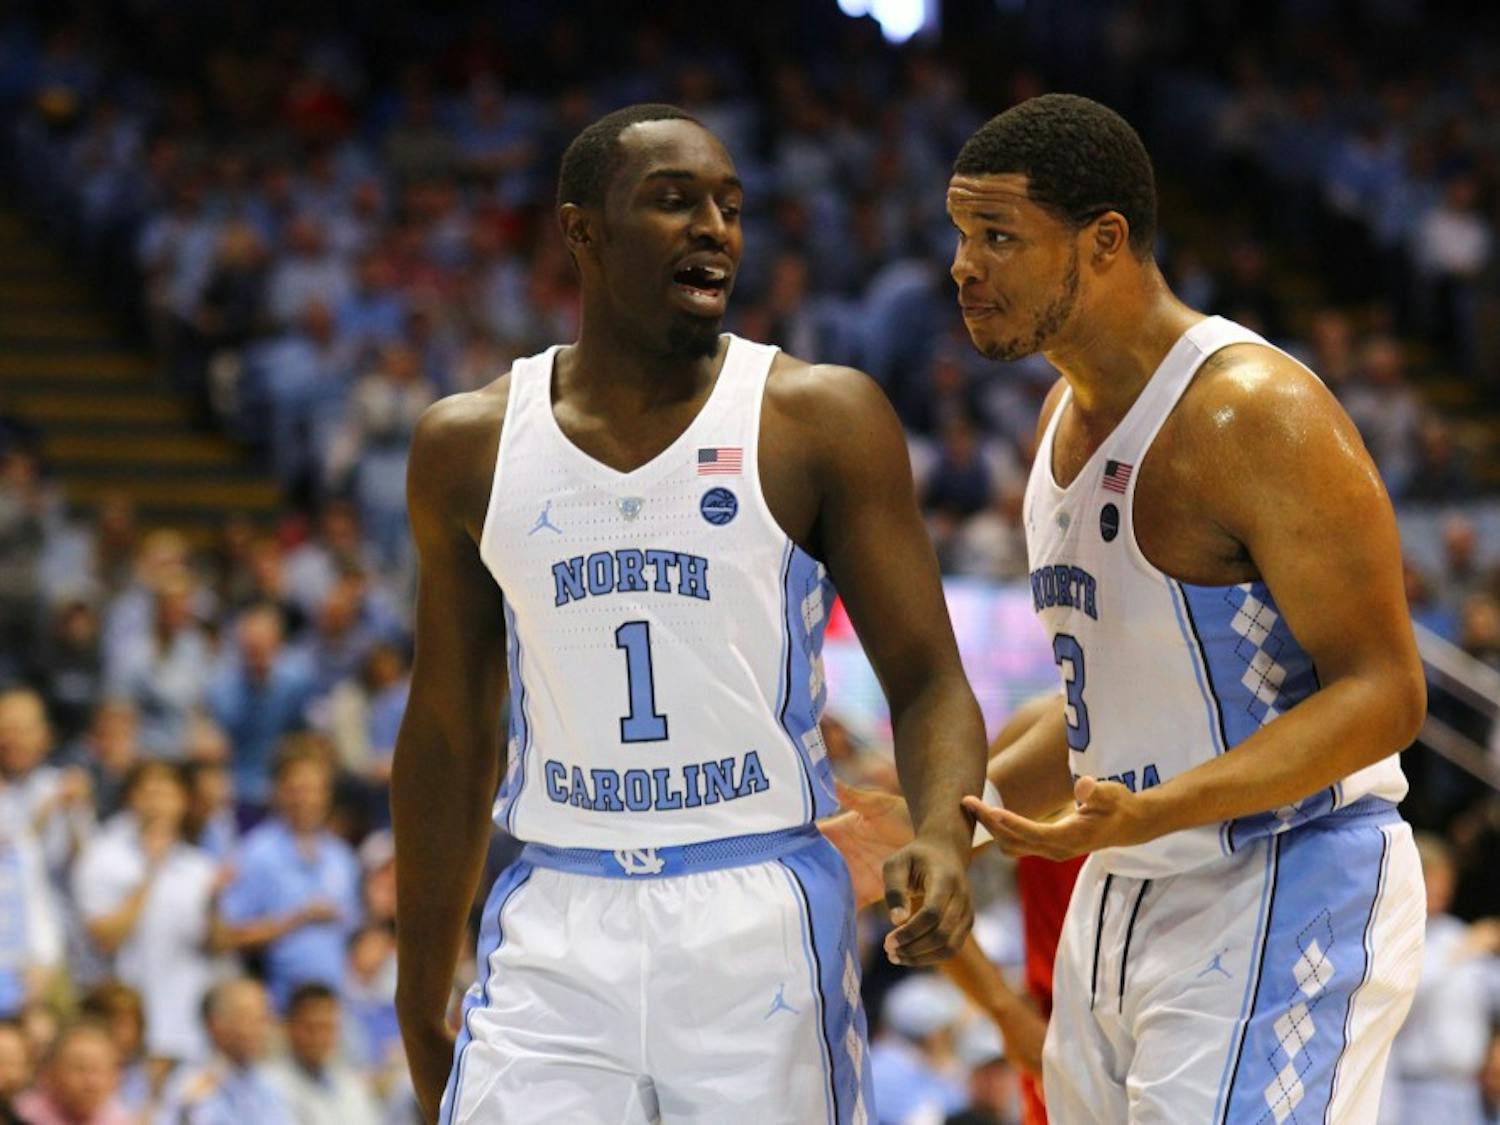 Junior forward Theo Pinson (1) strategizes with senior forward Kennedy Meeks (3) during the game against N.C. State.